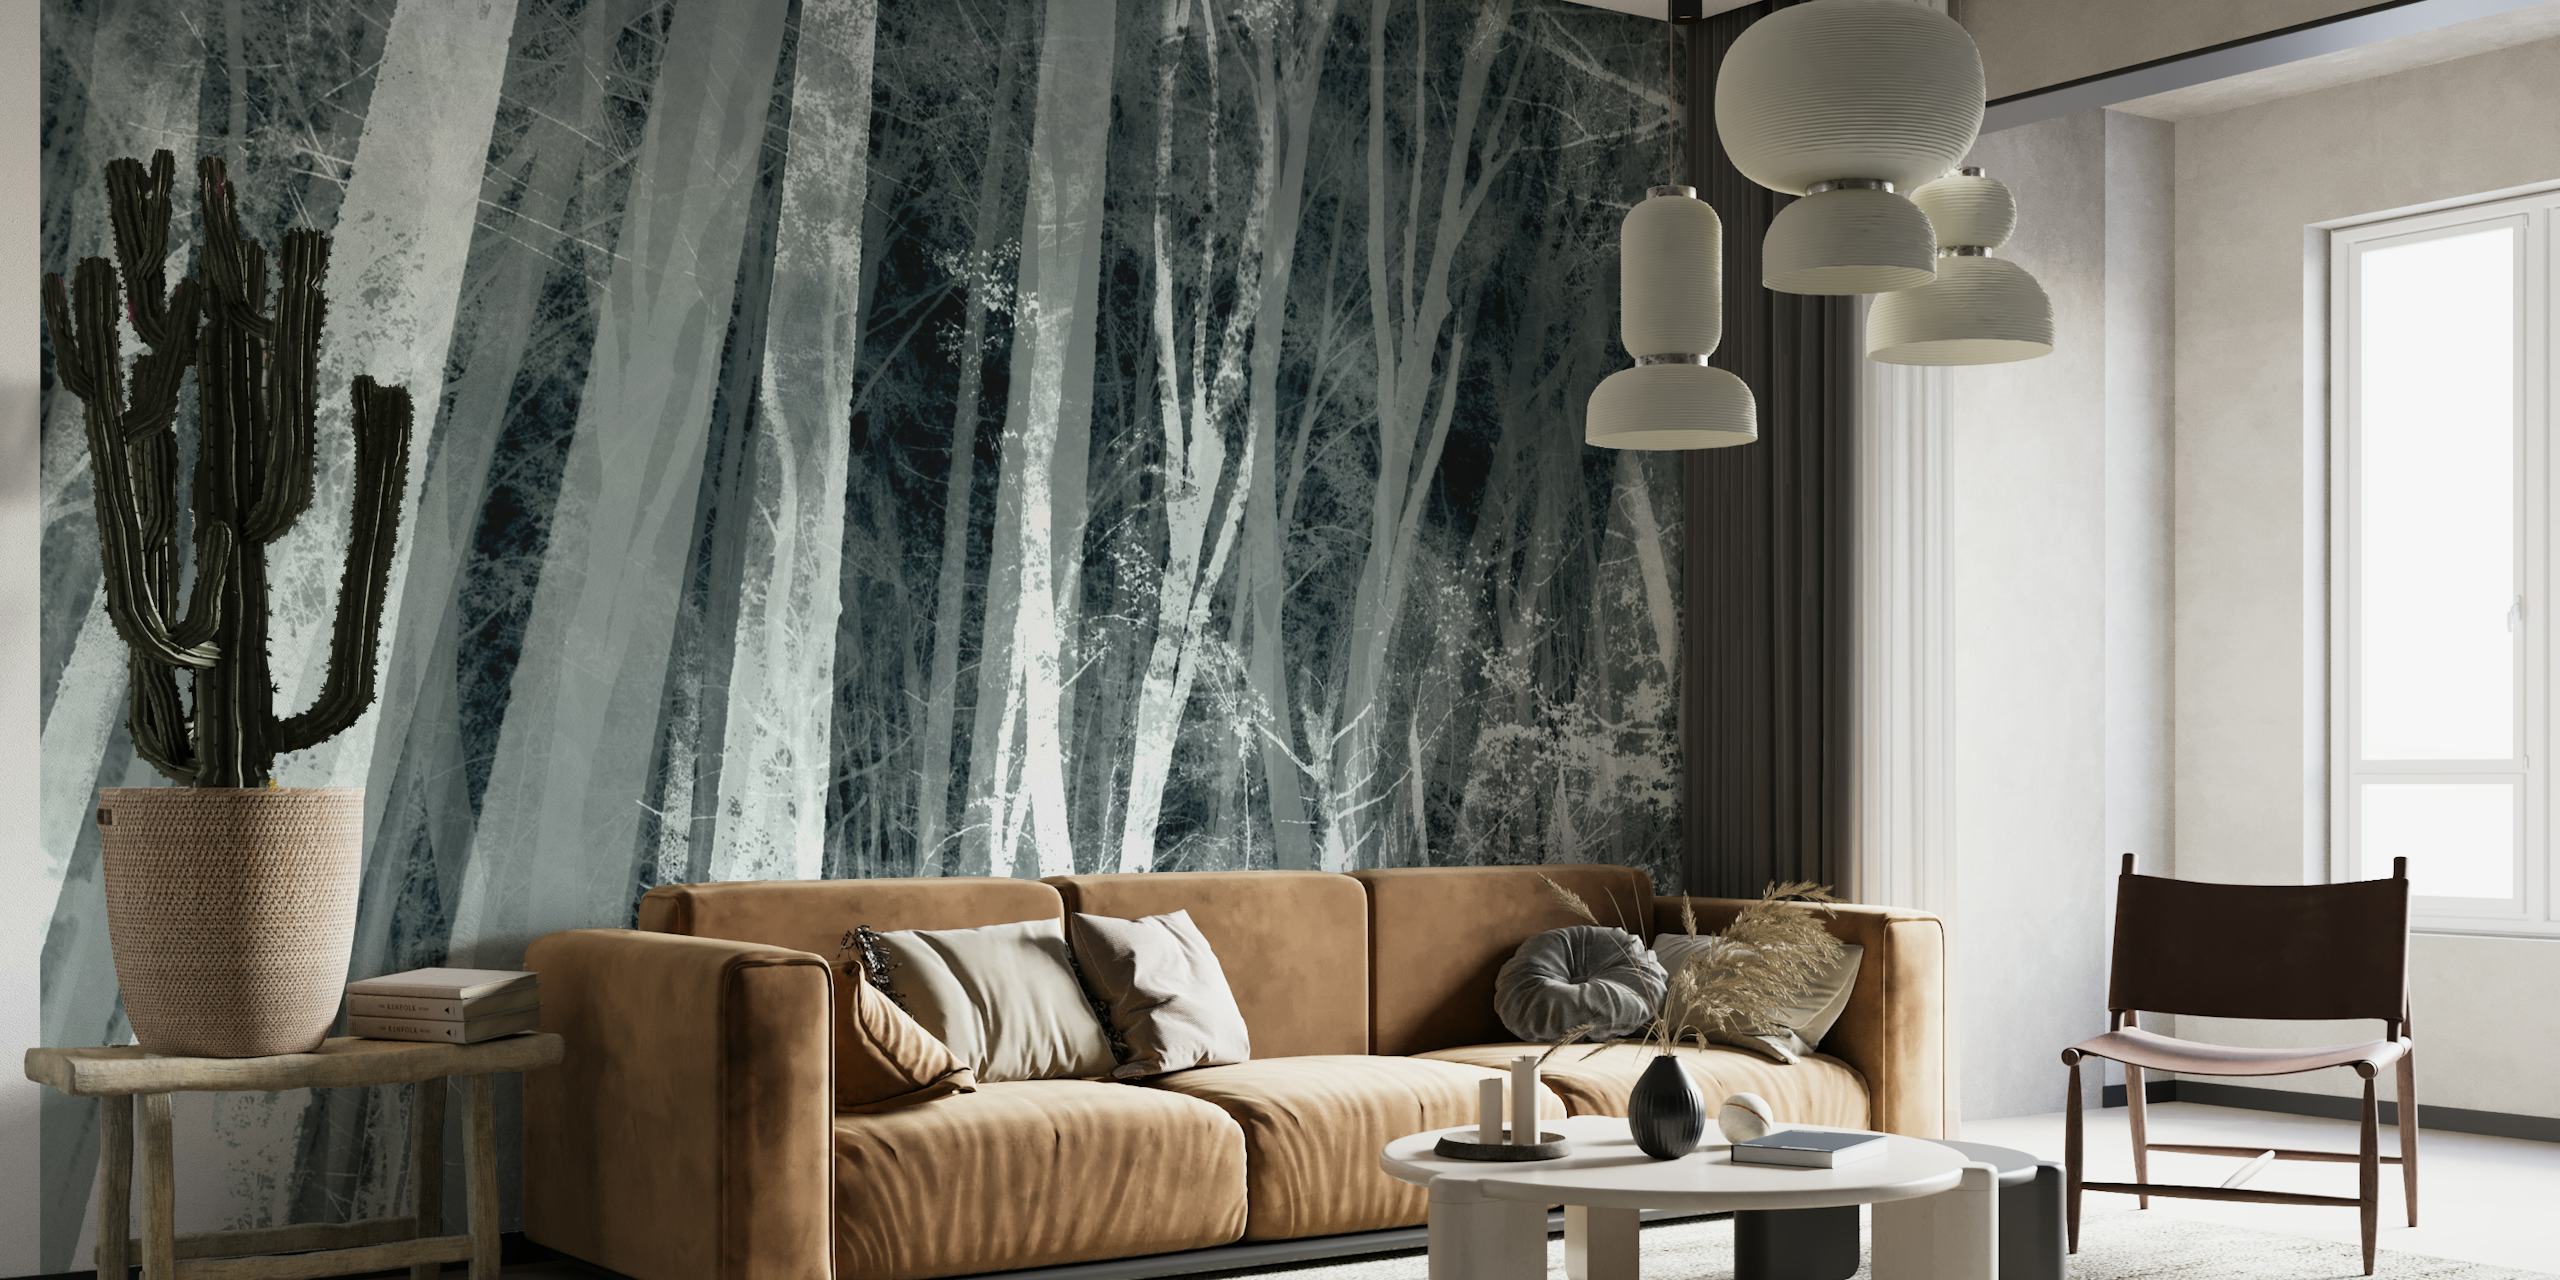 A wall mural of a forest in grayscale hues, with tall trees and a misty atmosphere.